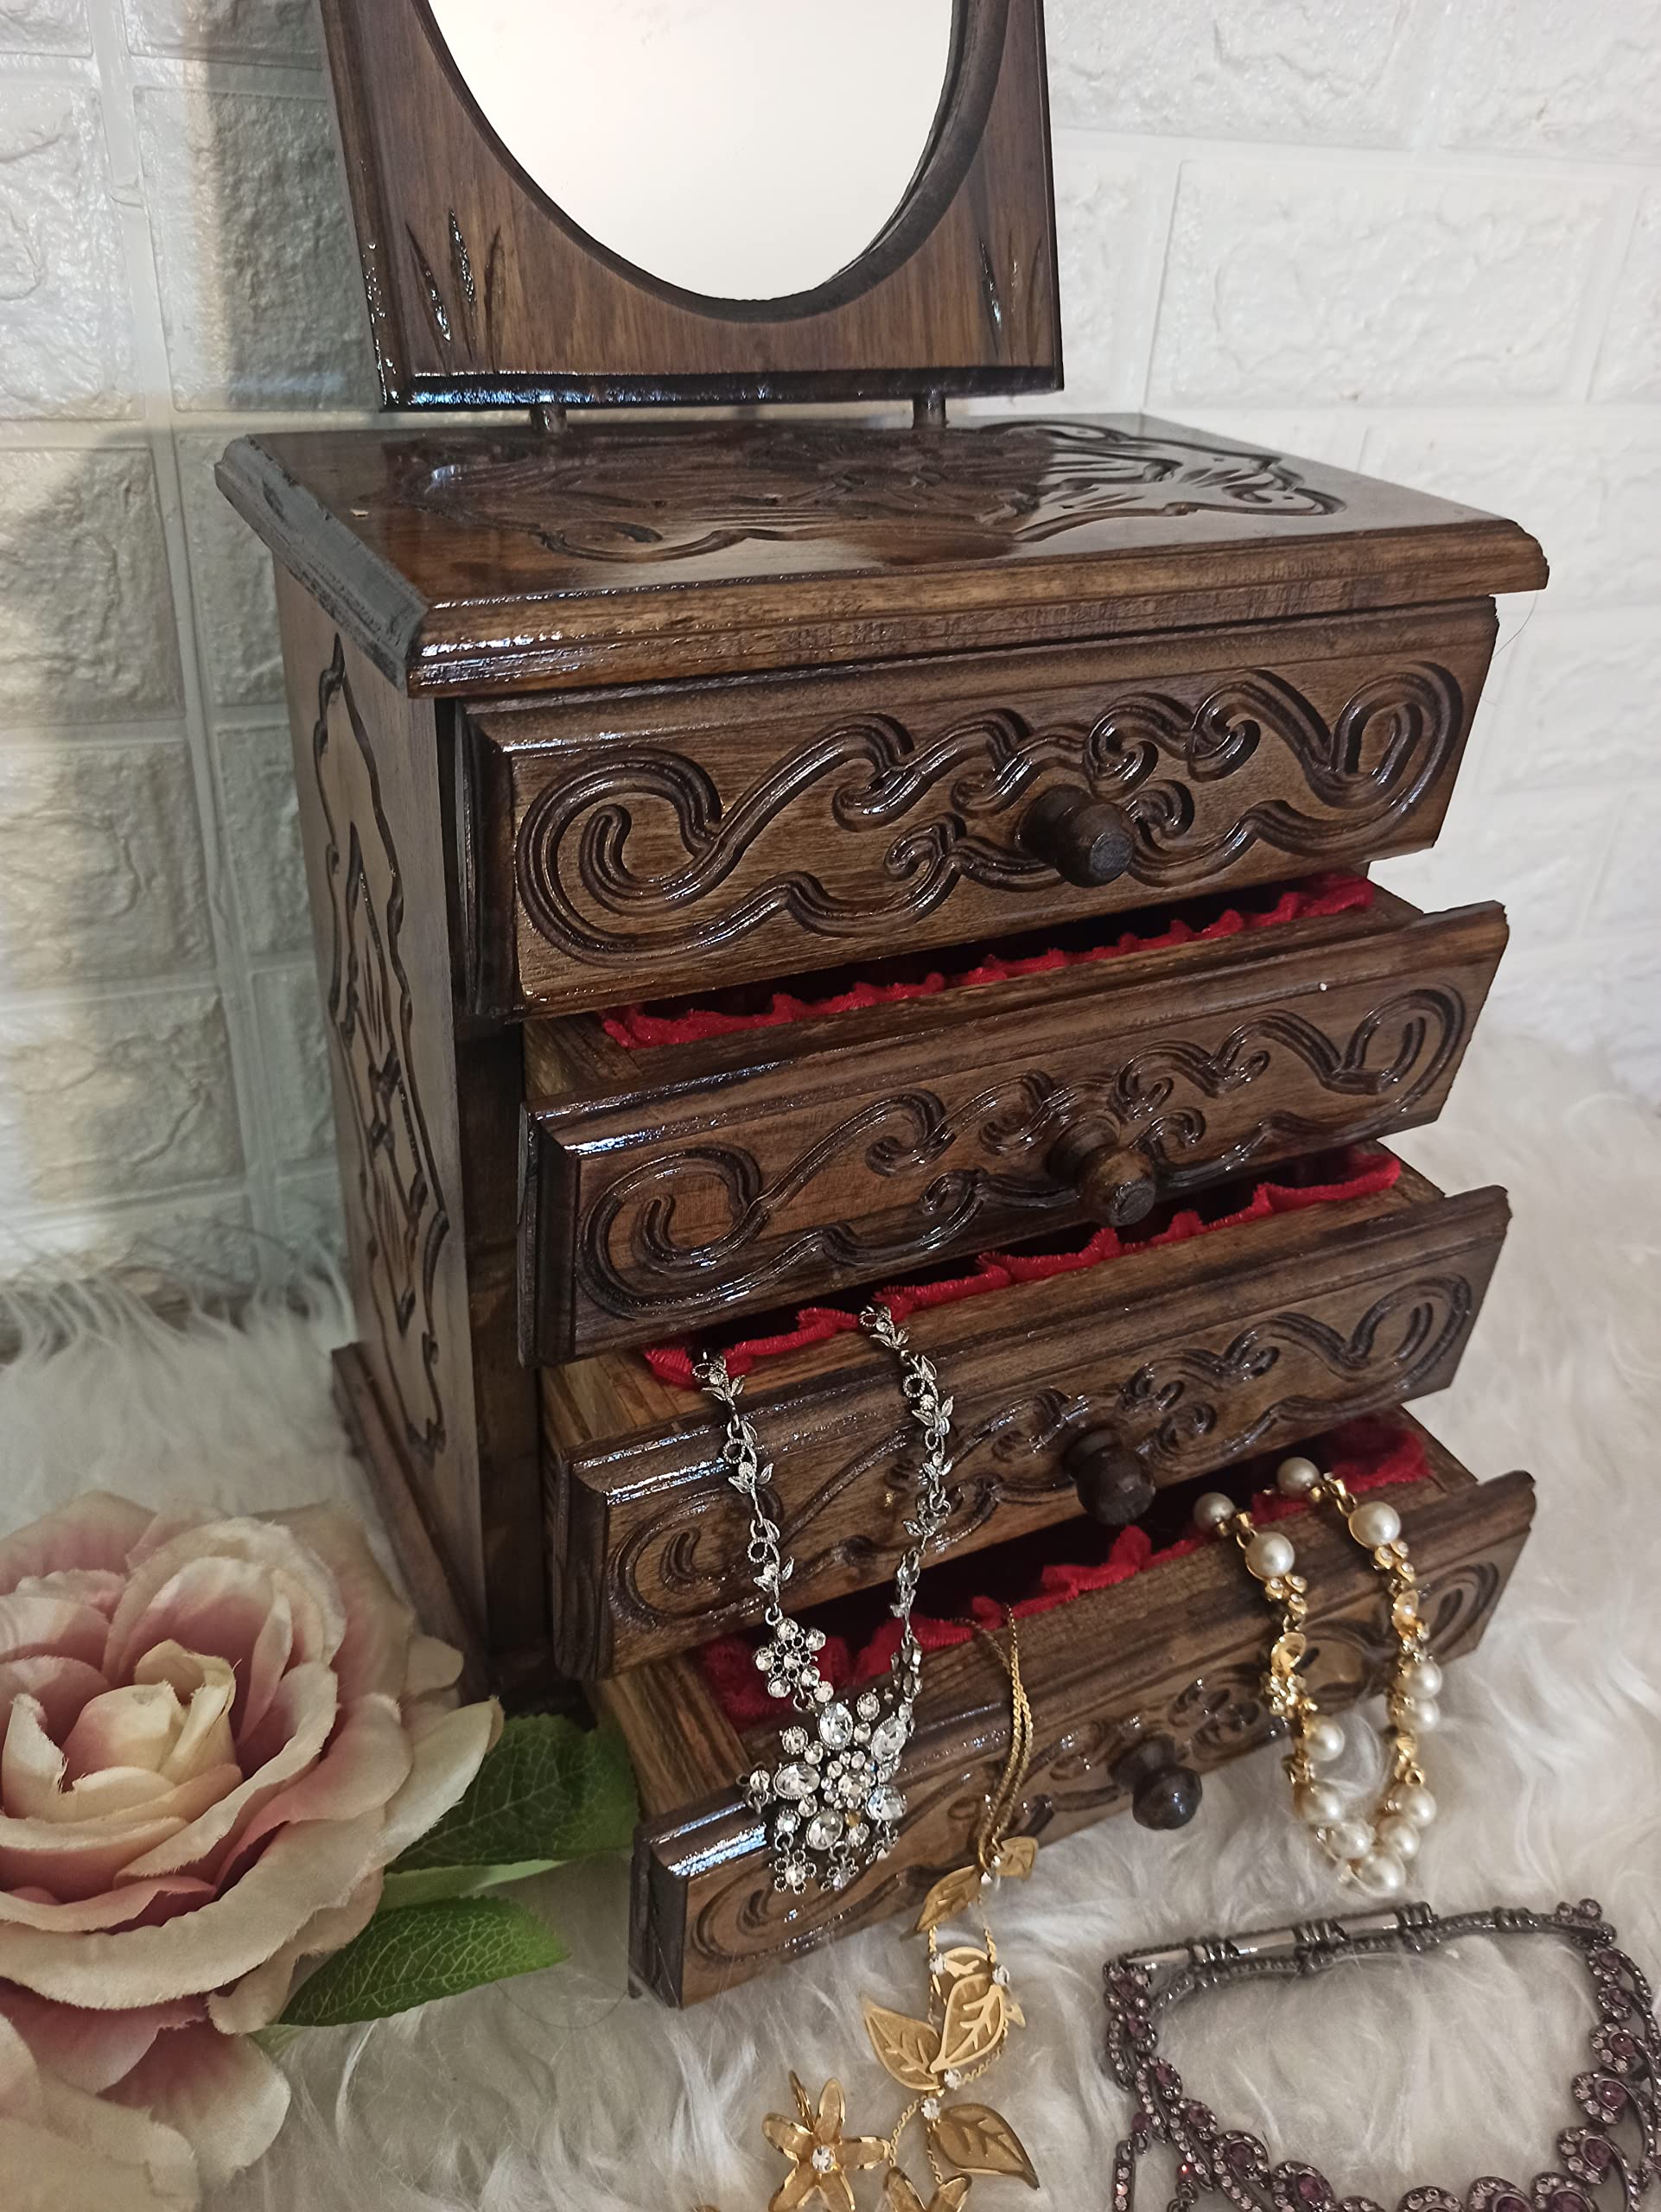 Hand-carved walnut wood chest